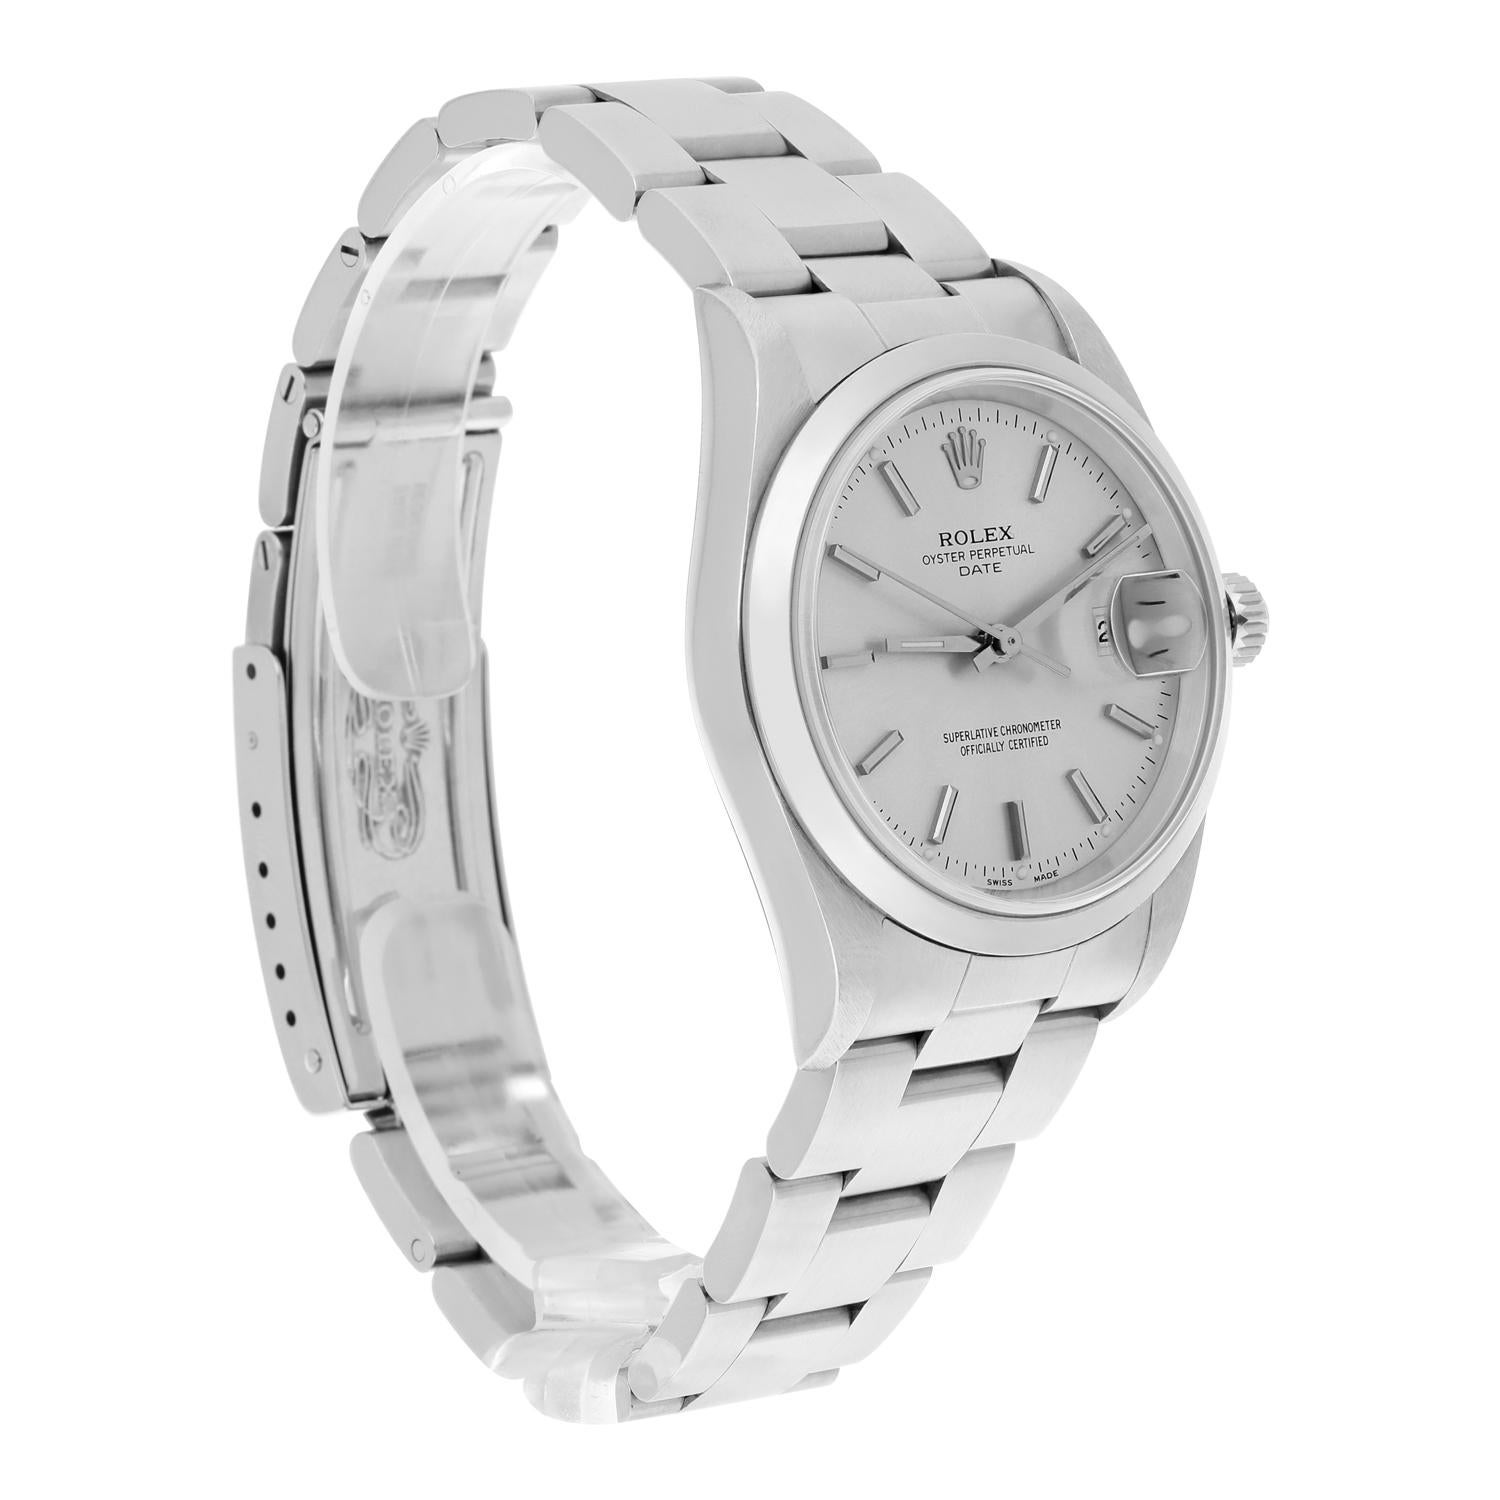 Moderne Rolex Date 34mm Stainless Steel Watch Oyster Band Silver Dial Circa 2001 15200 en vente